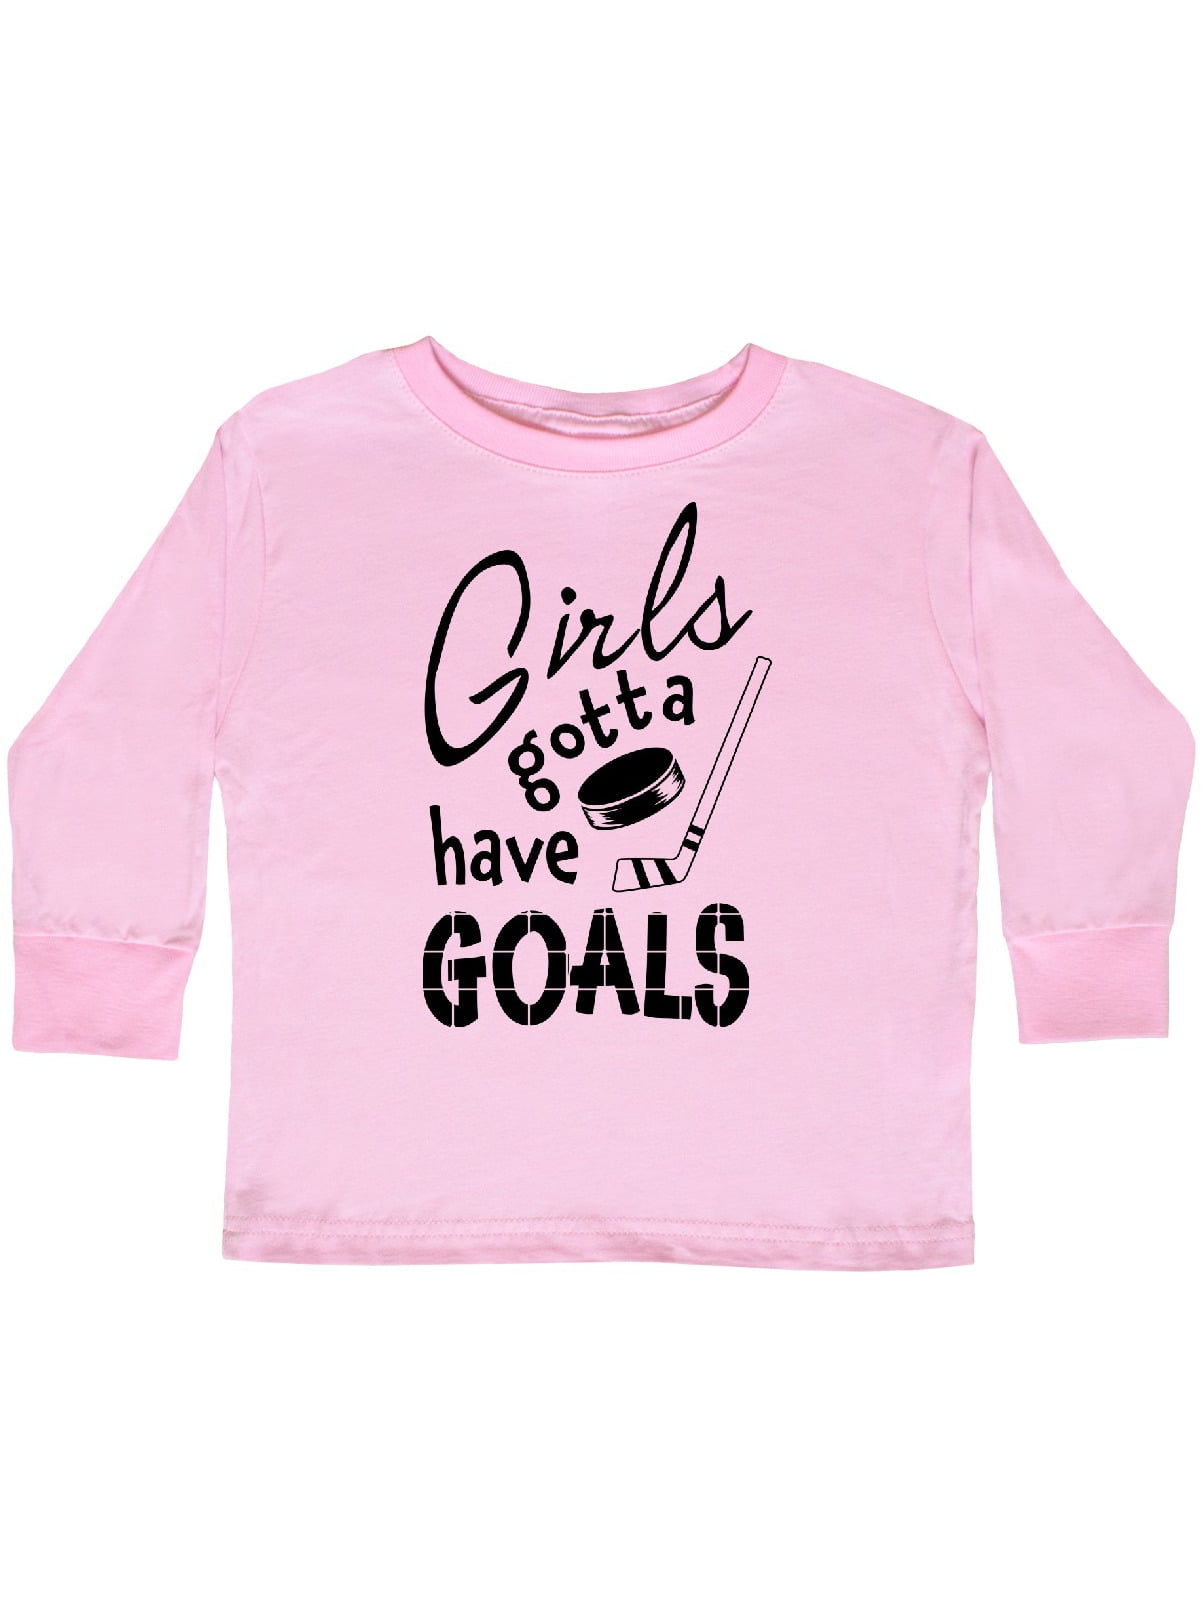 Todler Knowledge Hockey top puant skin rides blouse baby baby girl blouse 